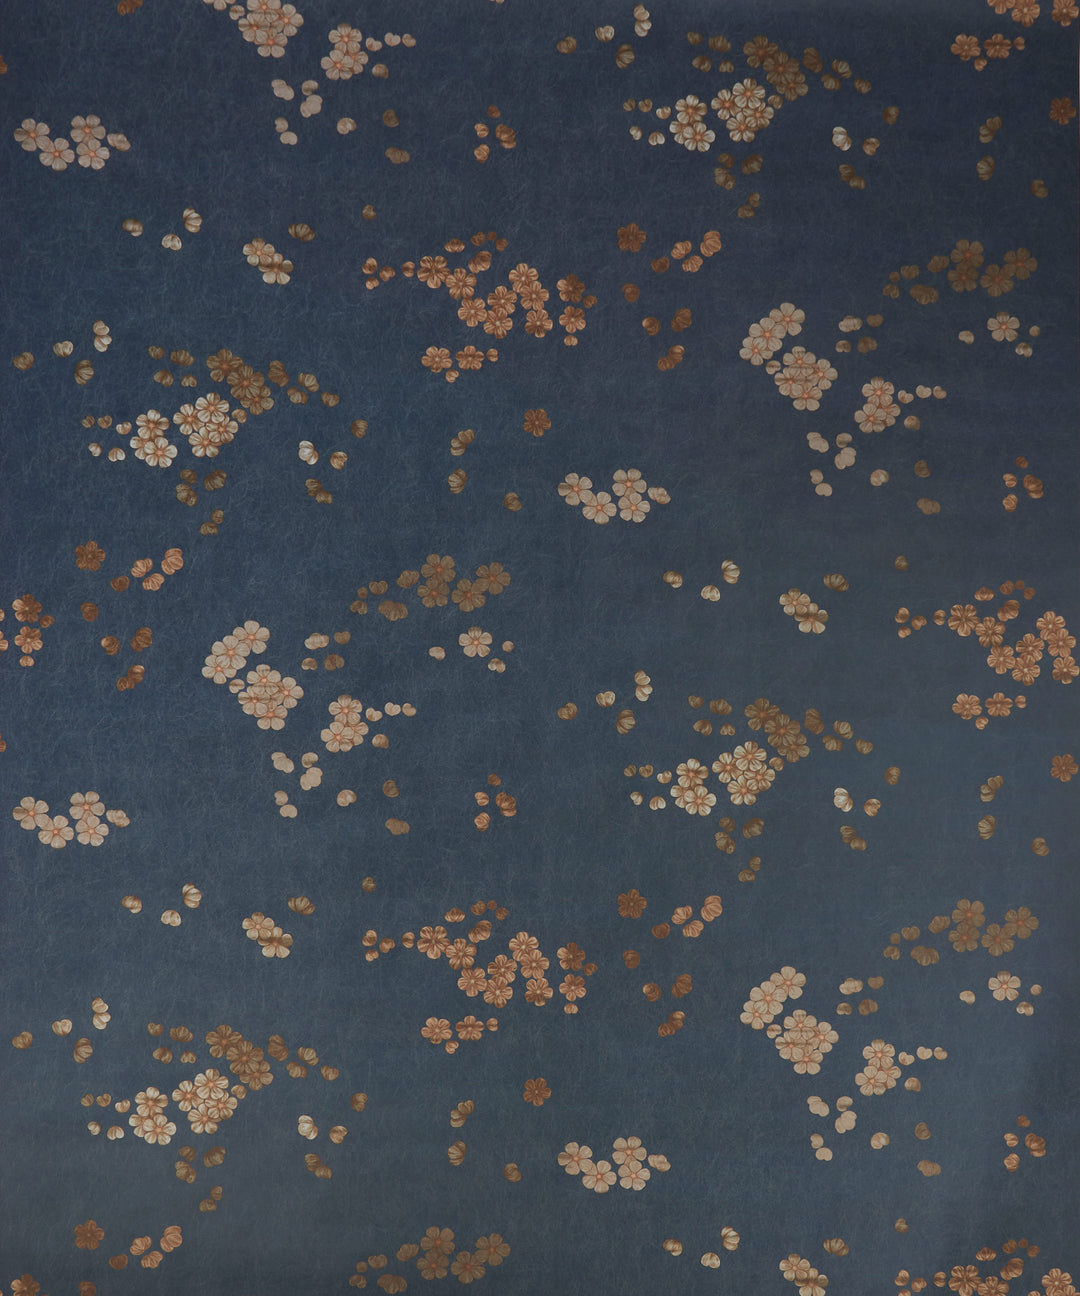 liberty-botanical-atlas-wallpaper-cherry-blossom-chinese-wallaper-scattered-flowers-blue-ink